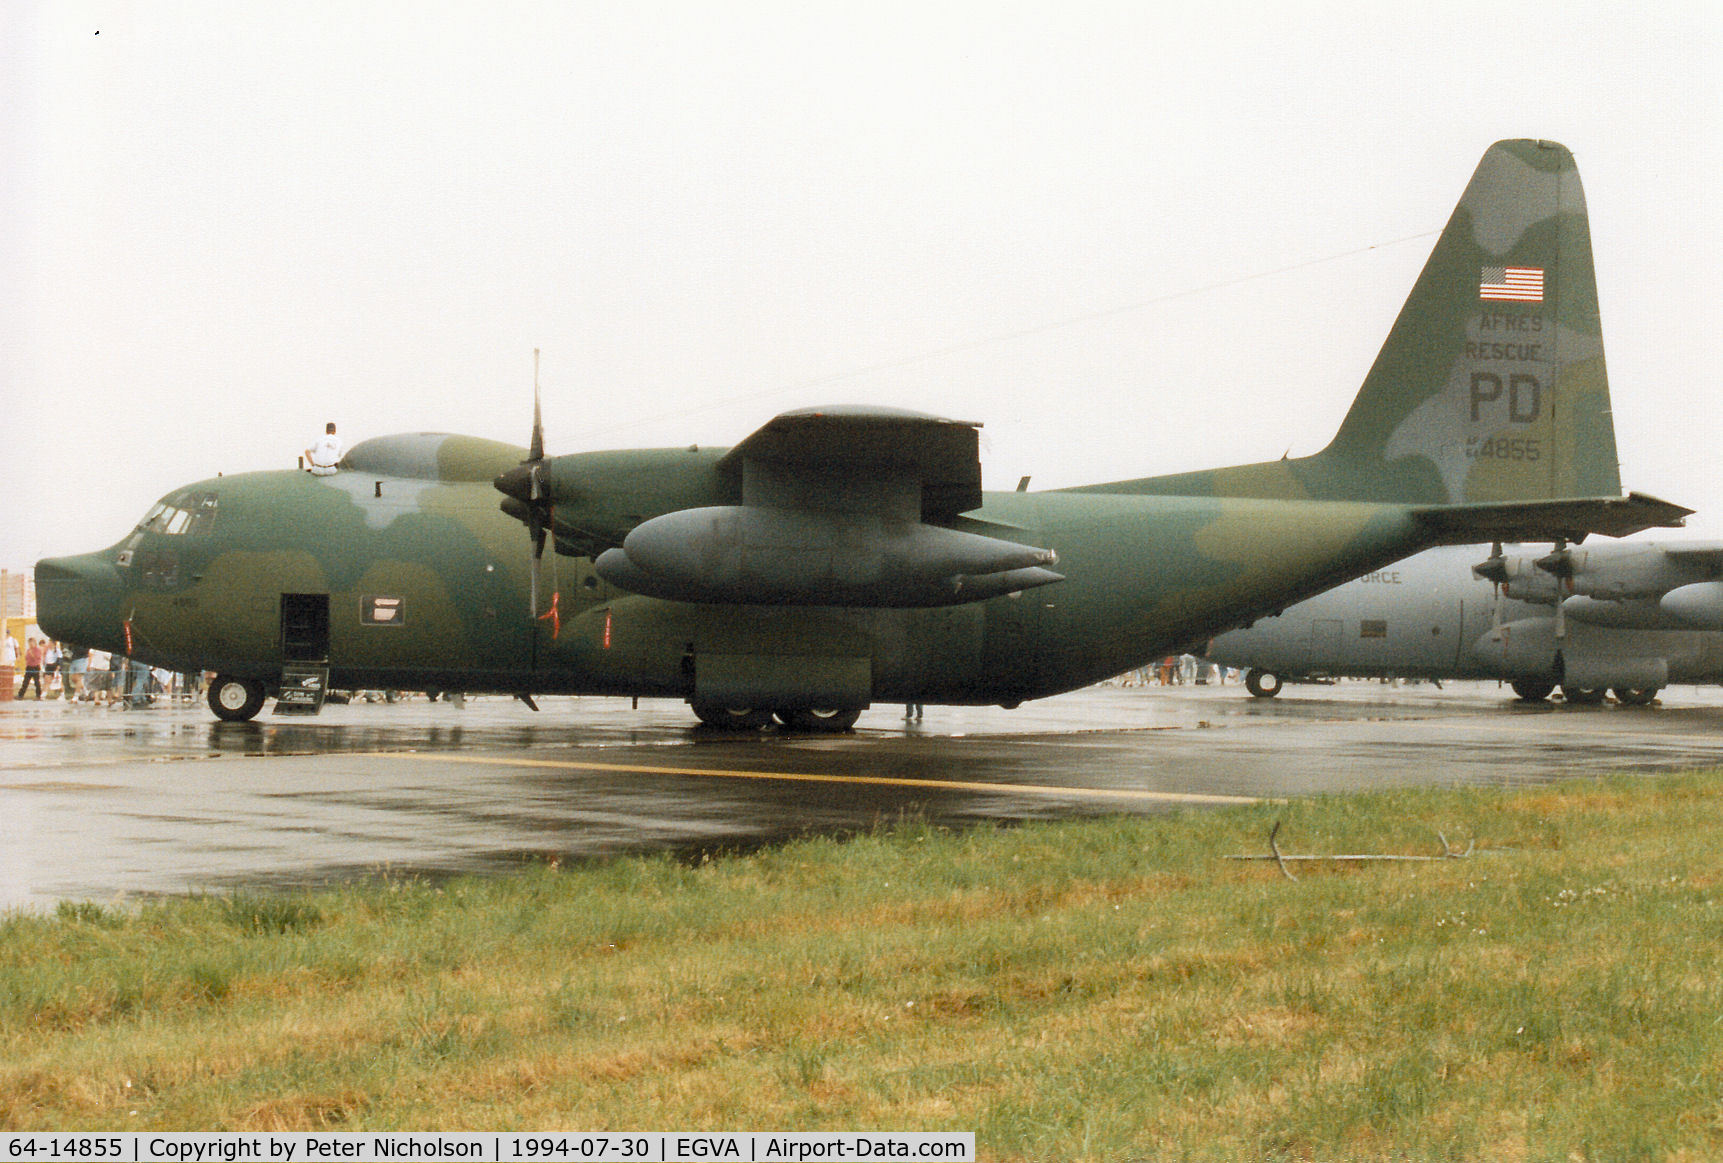 64-14855, 1964 Lockheed HC-130H-LM Hercules C/N 382-4055, HC-130H Hercules, callsign King 55, of 304th Rescue Squadron on display at the 1994 Intnl Air Tattoo at RAF Fairford.